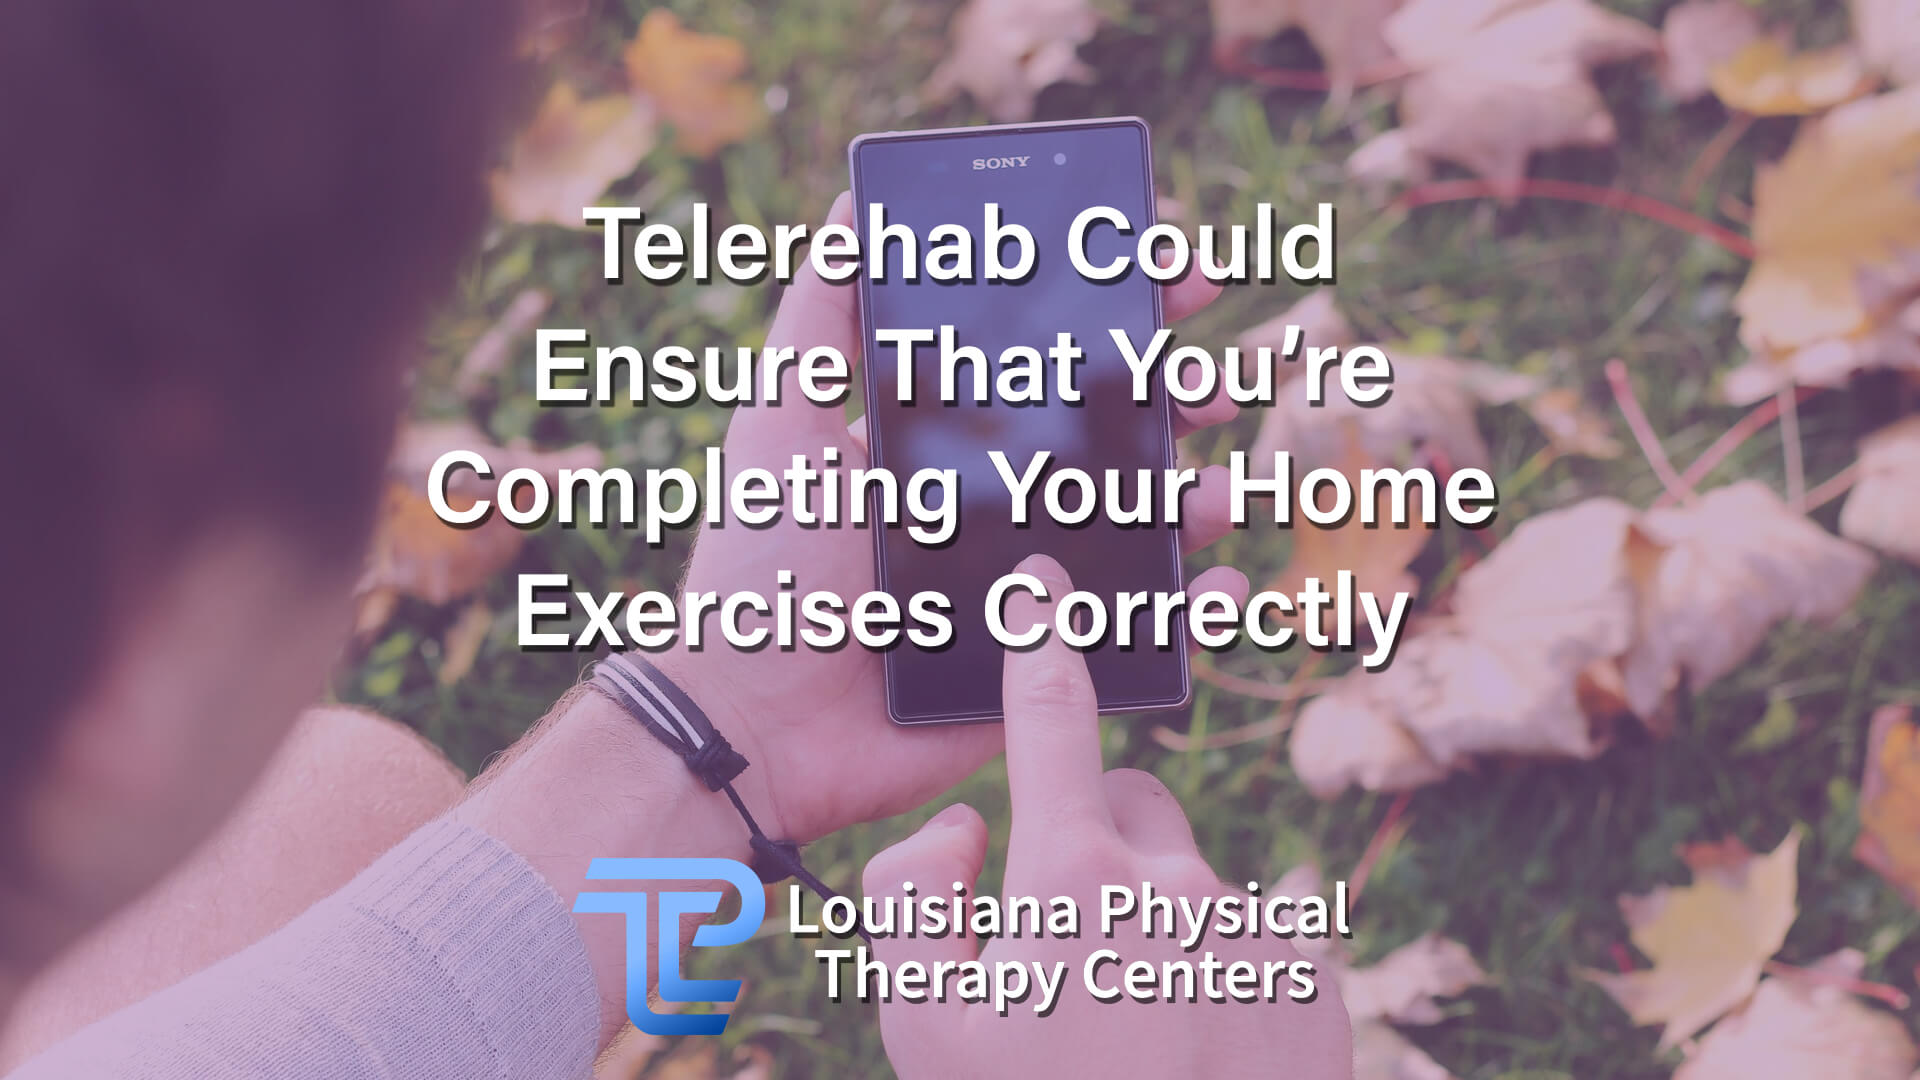 Telerehab Could Ensure That You’re Completing Your Home Exercises Correctly